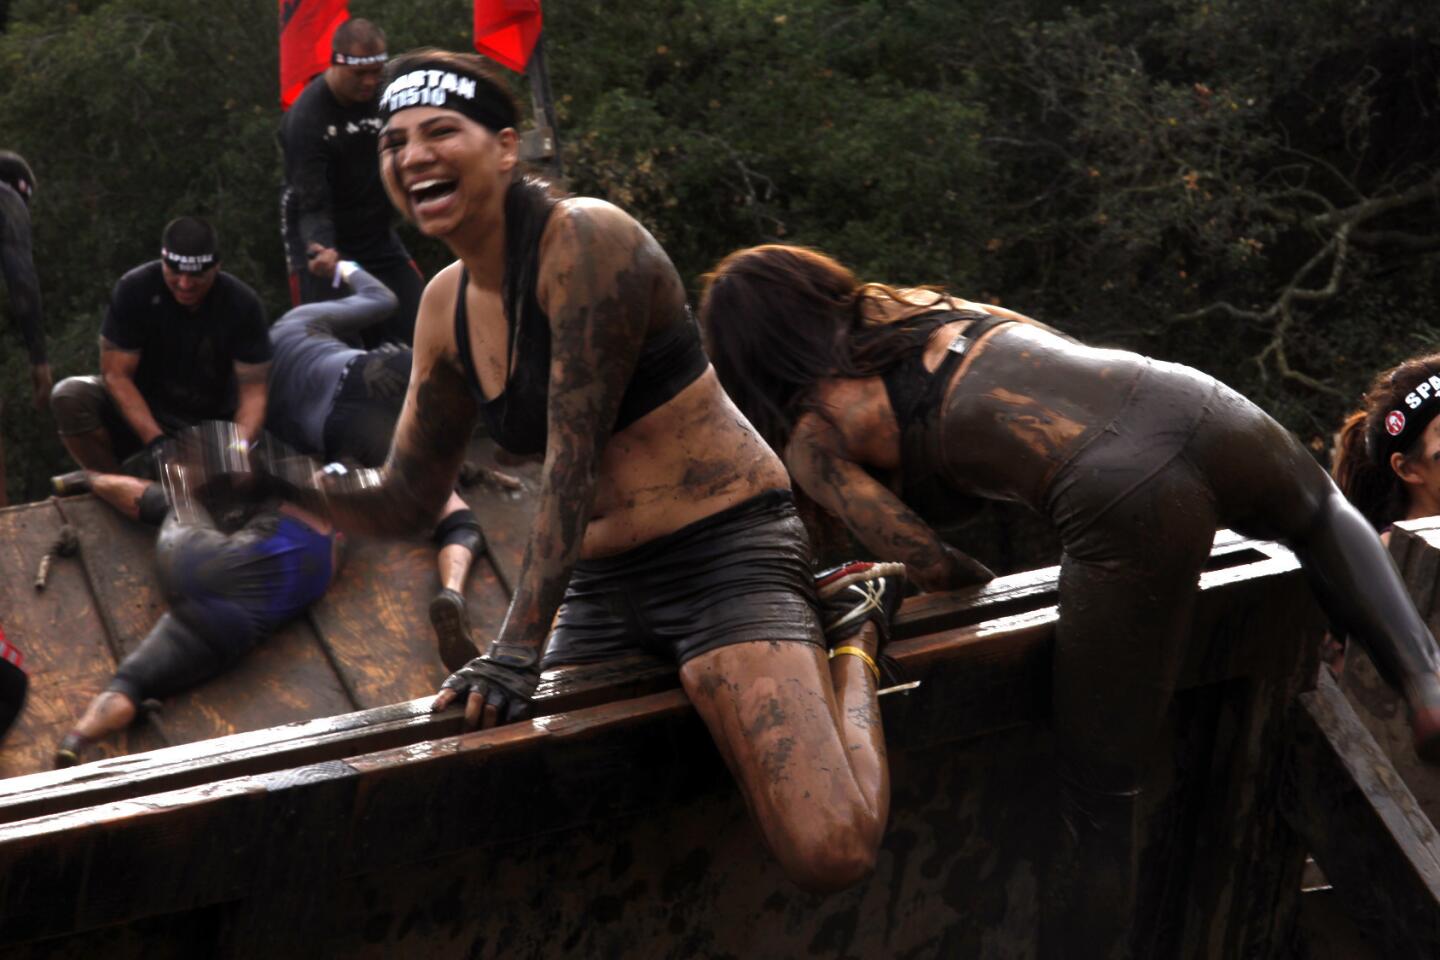 Mud runners risk limb and even life to satisfy extreme-sports